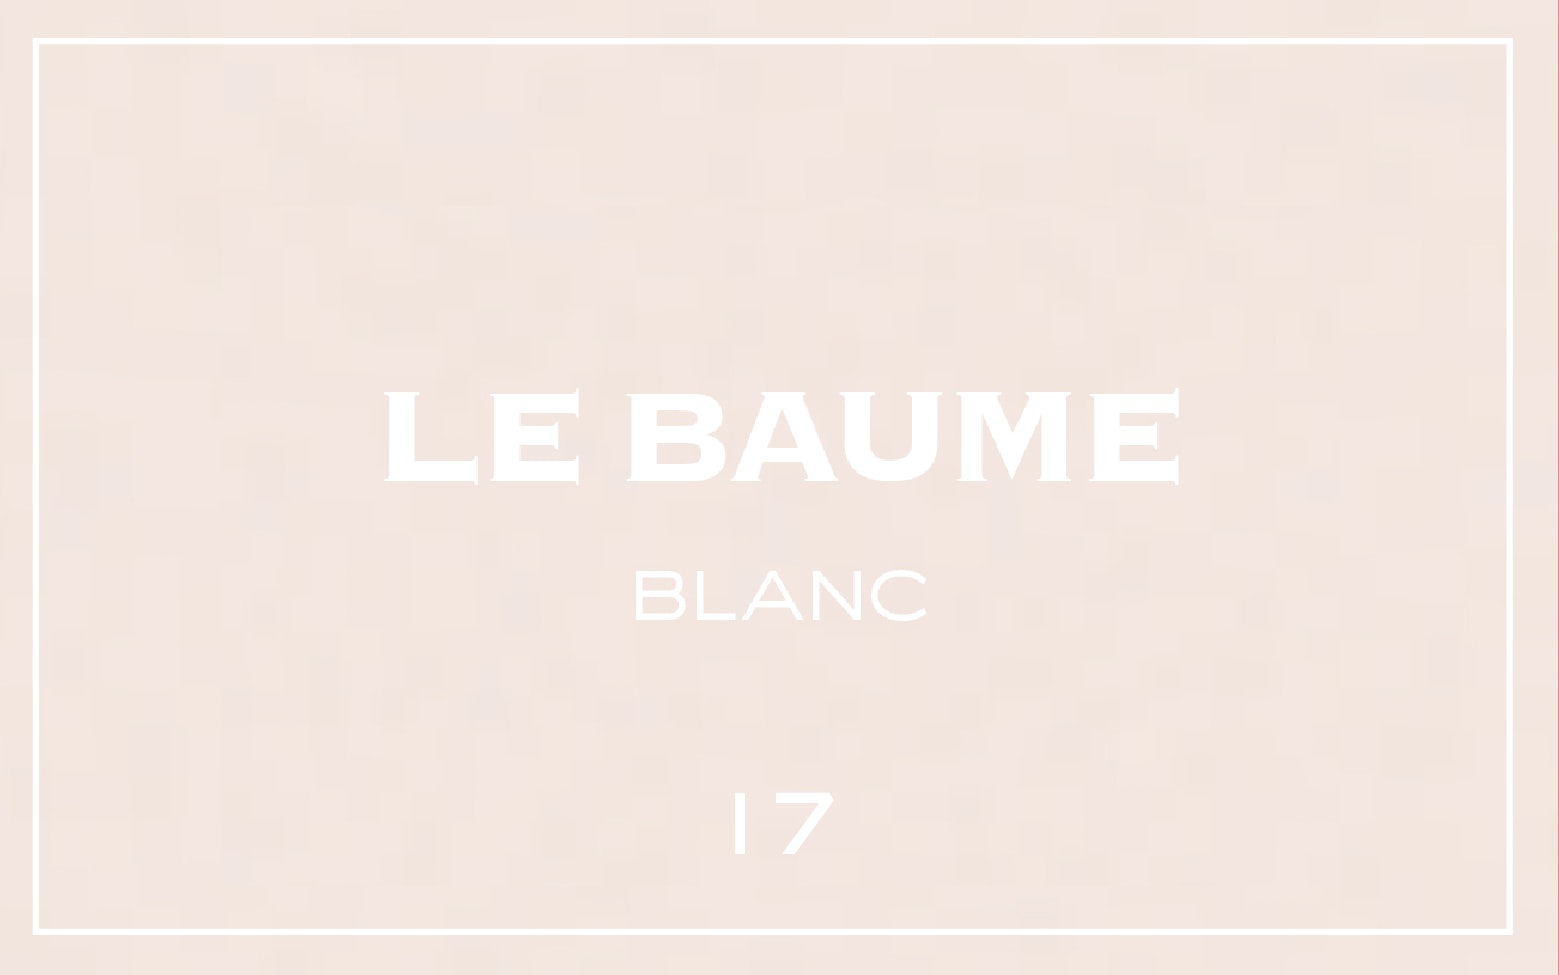 La bouche rouge White balm lipstick swatch with text